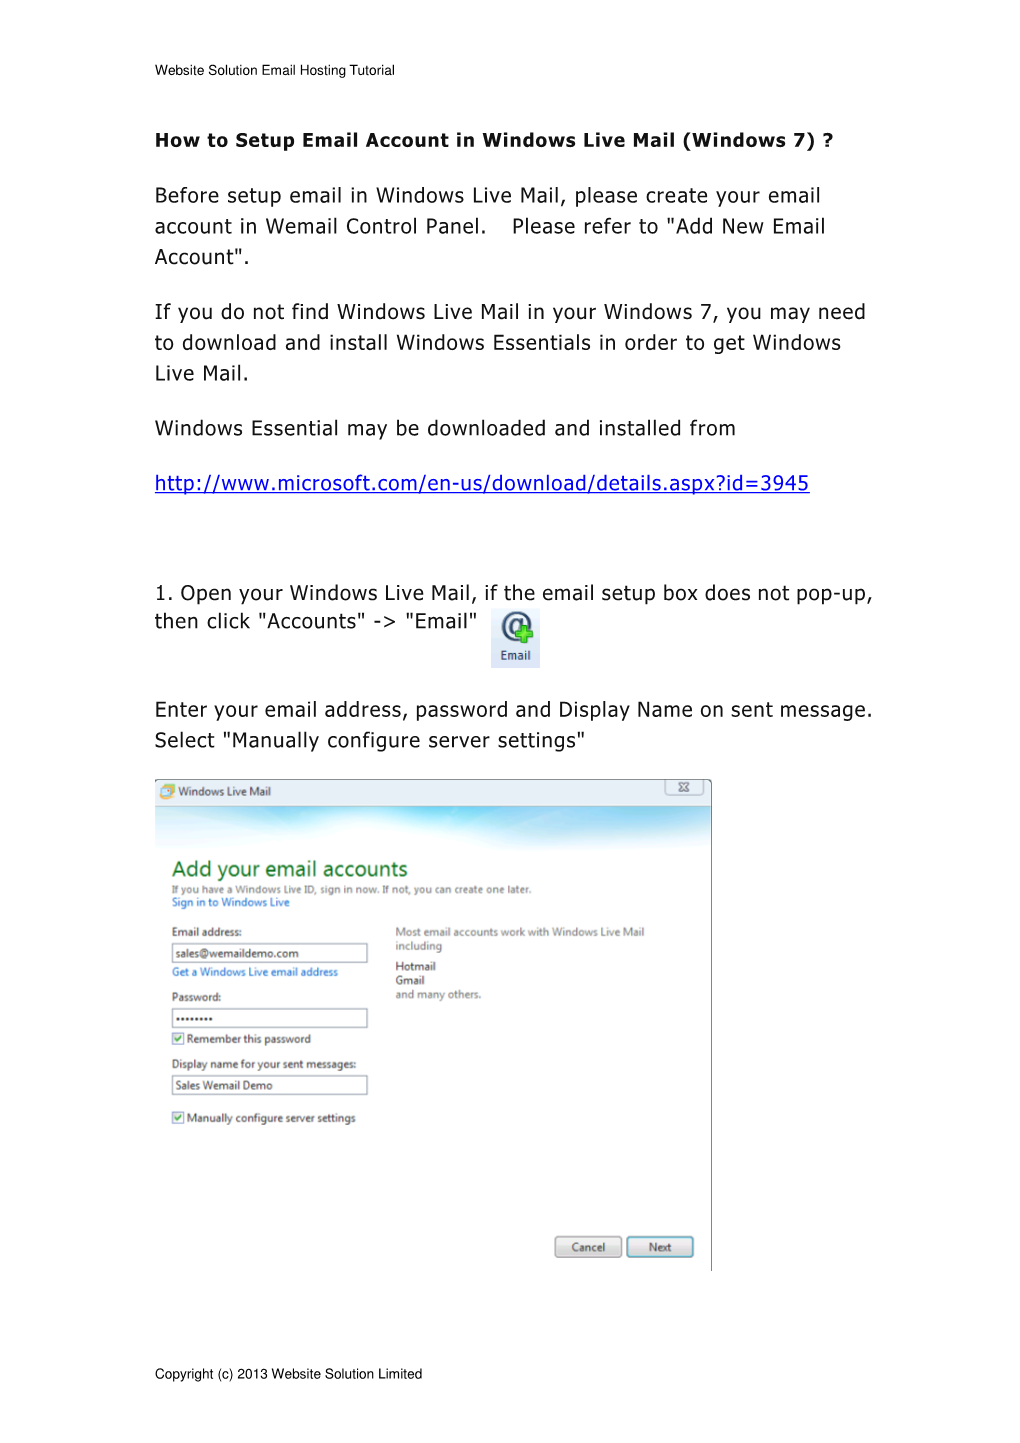 Before Setup Email in Windows Live Mail, Please Create Your Email Account in Wemail Control Panel